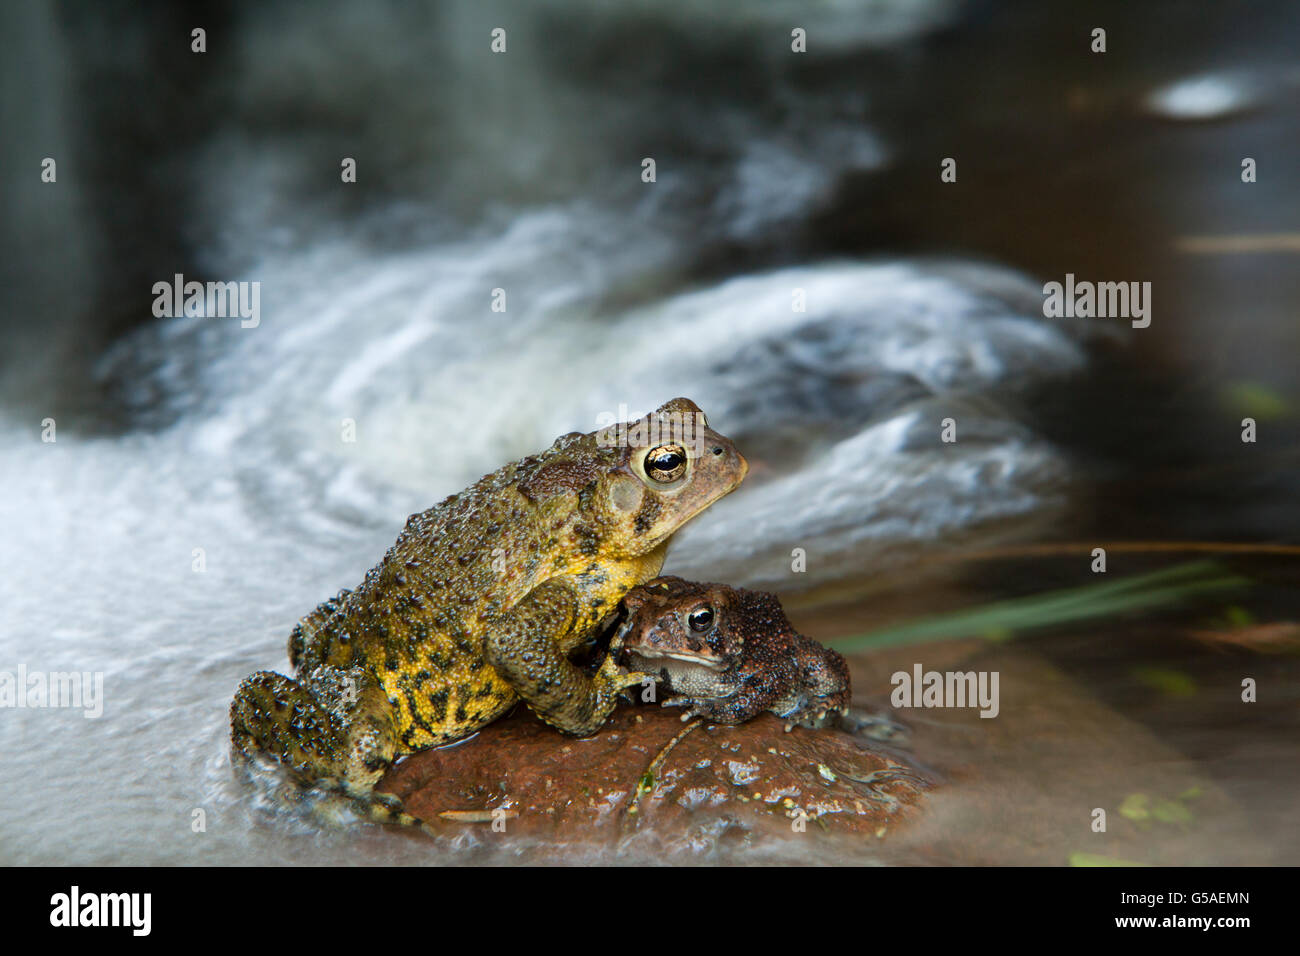 Adult and Juvenile Toad Together Stock Photo